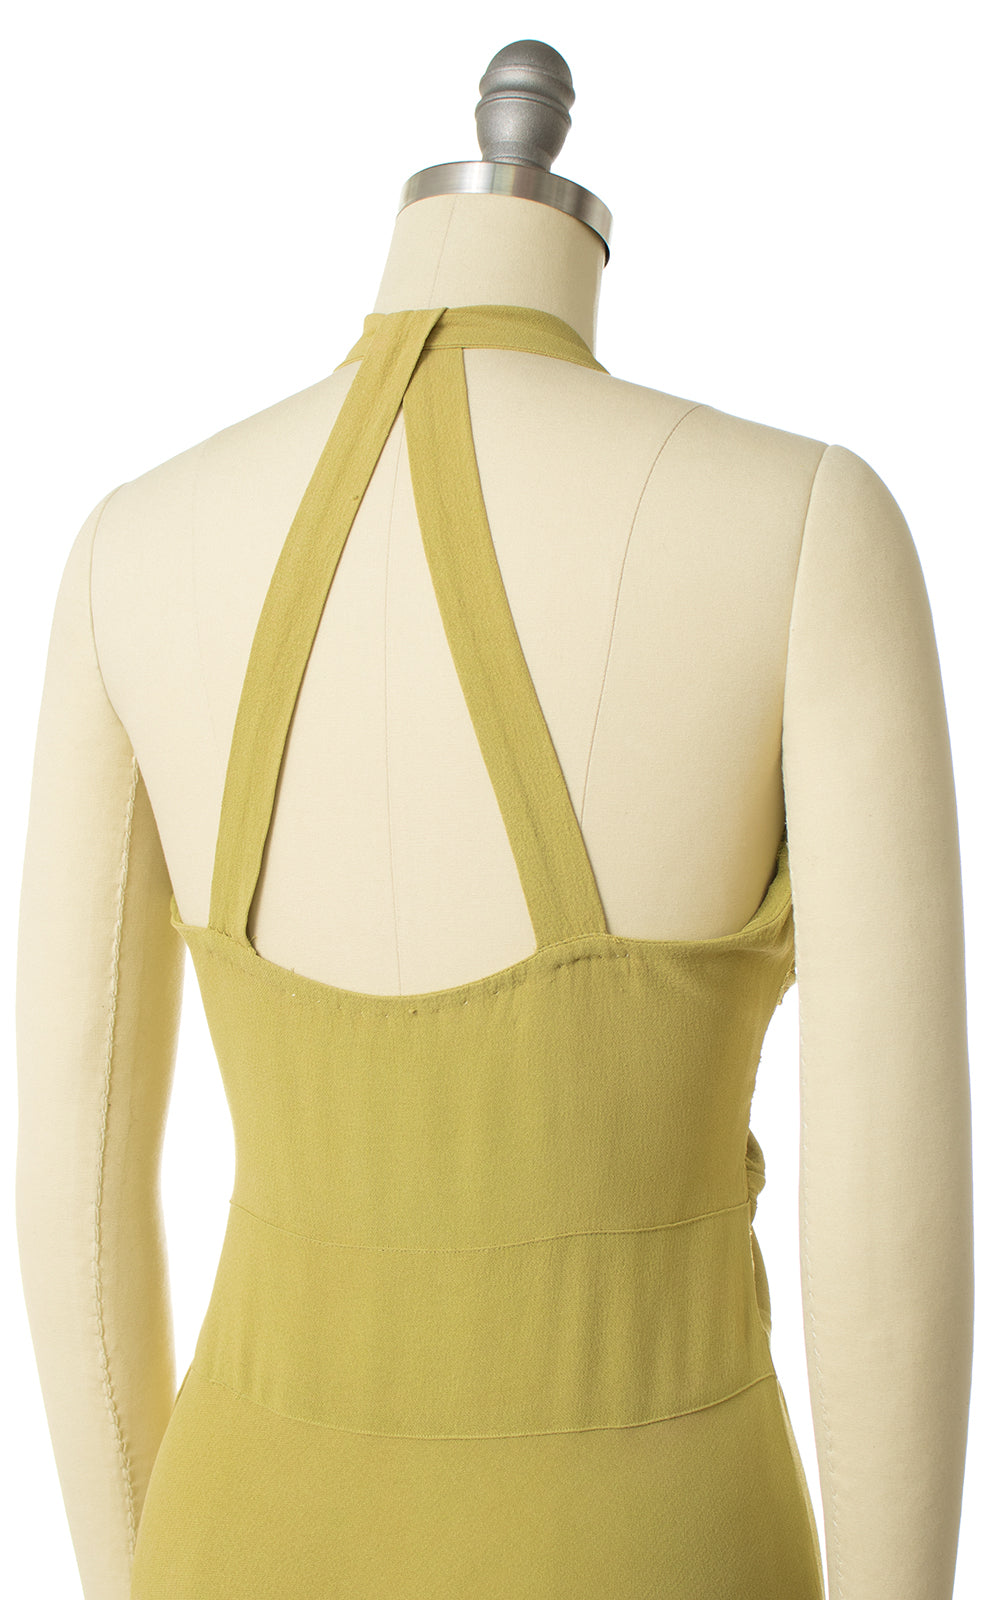 1930s Chartreuse Bias Cut Rayon Crepe Gown